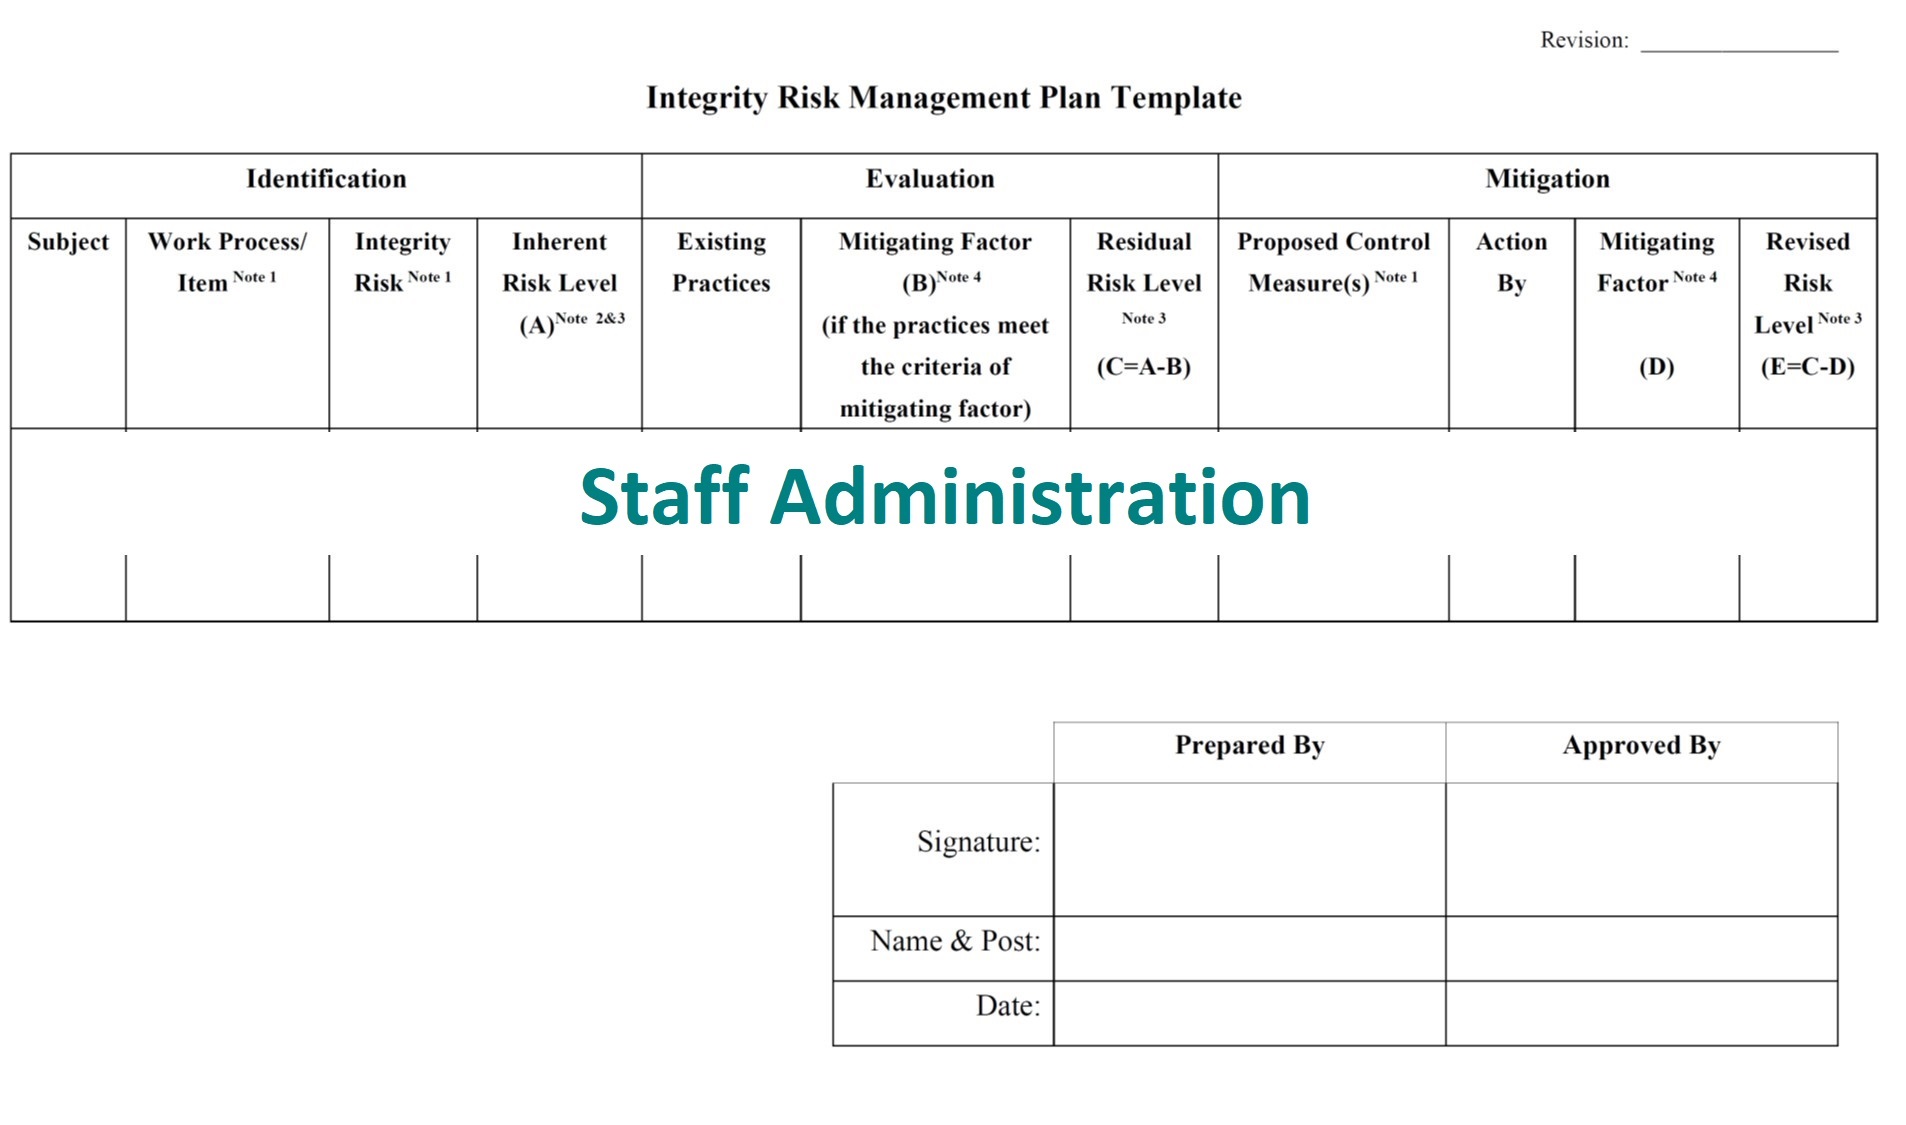 Integrity Risk Management on Staff Administration